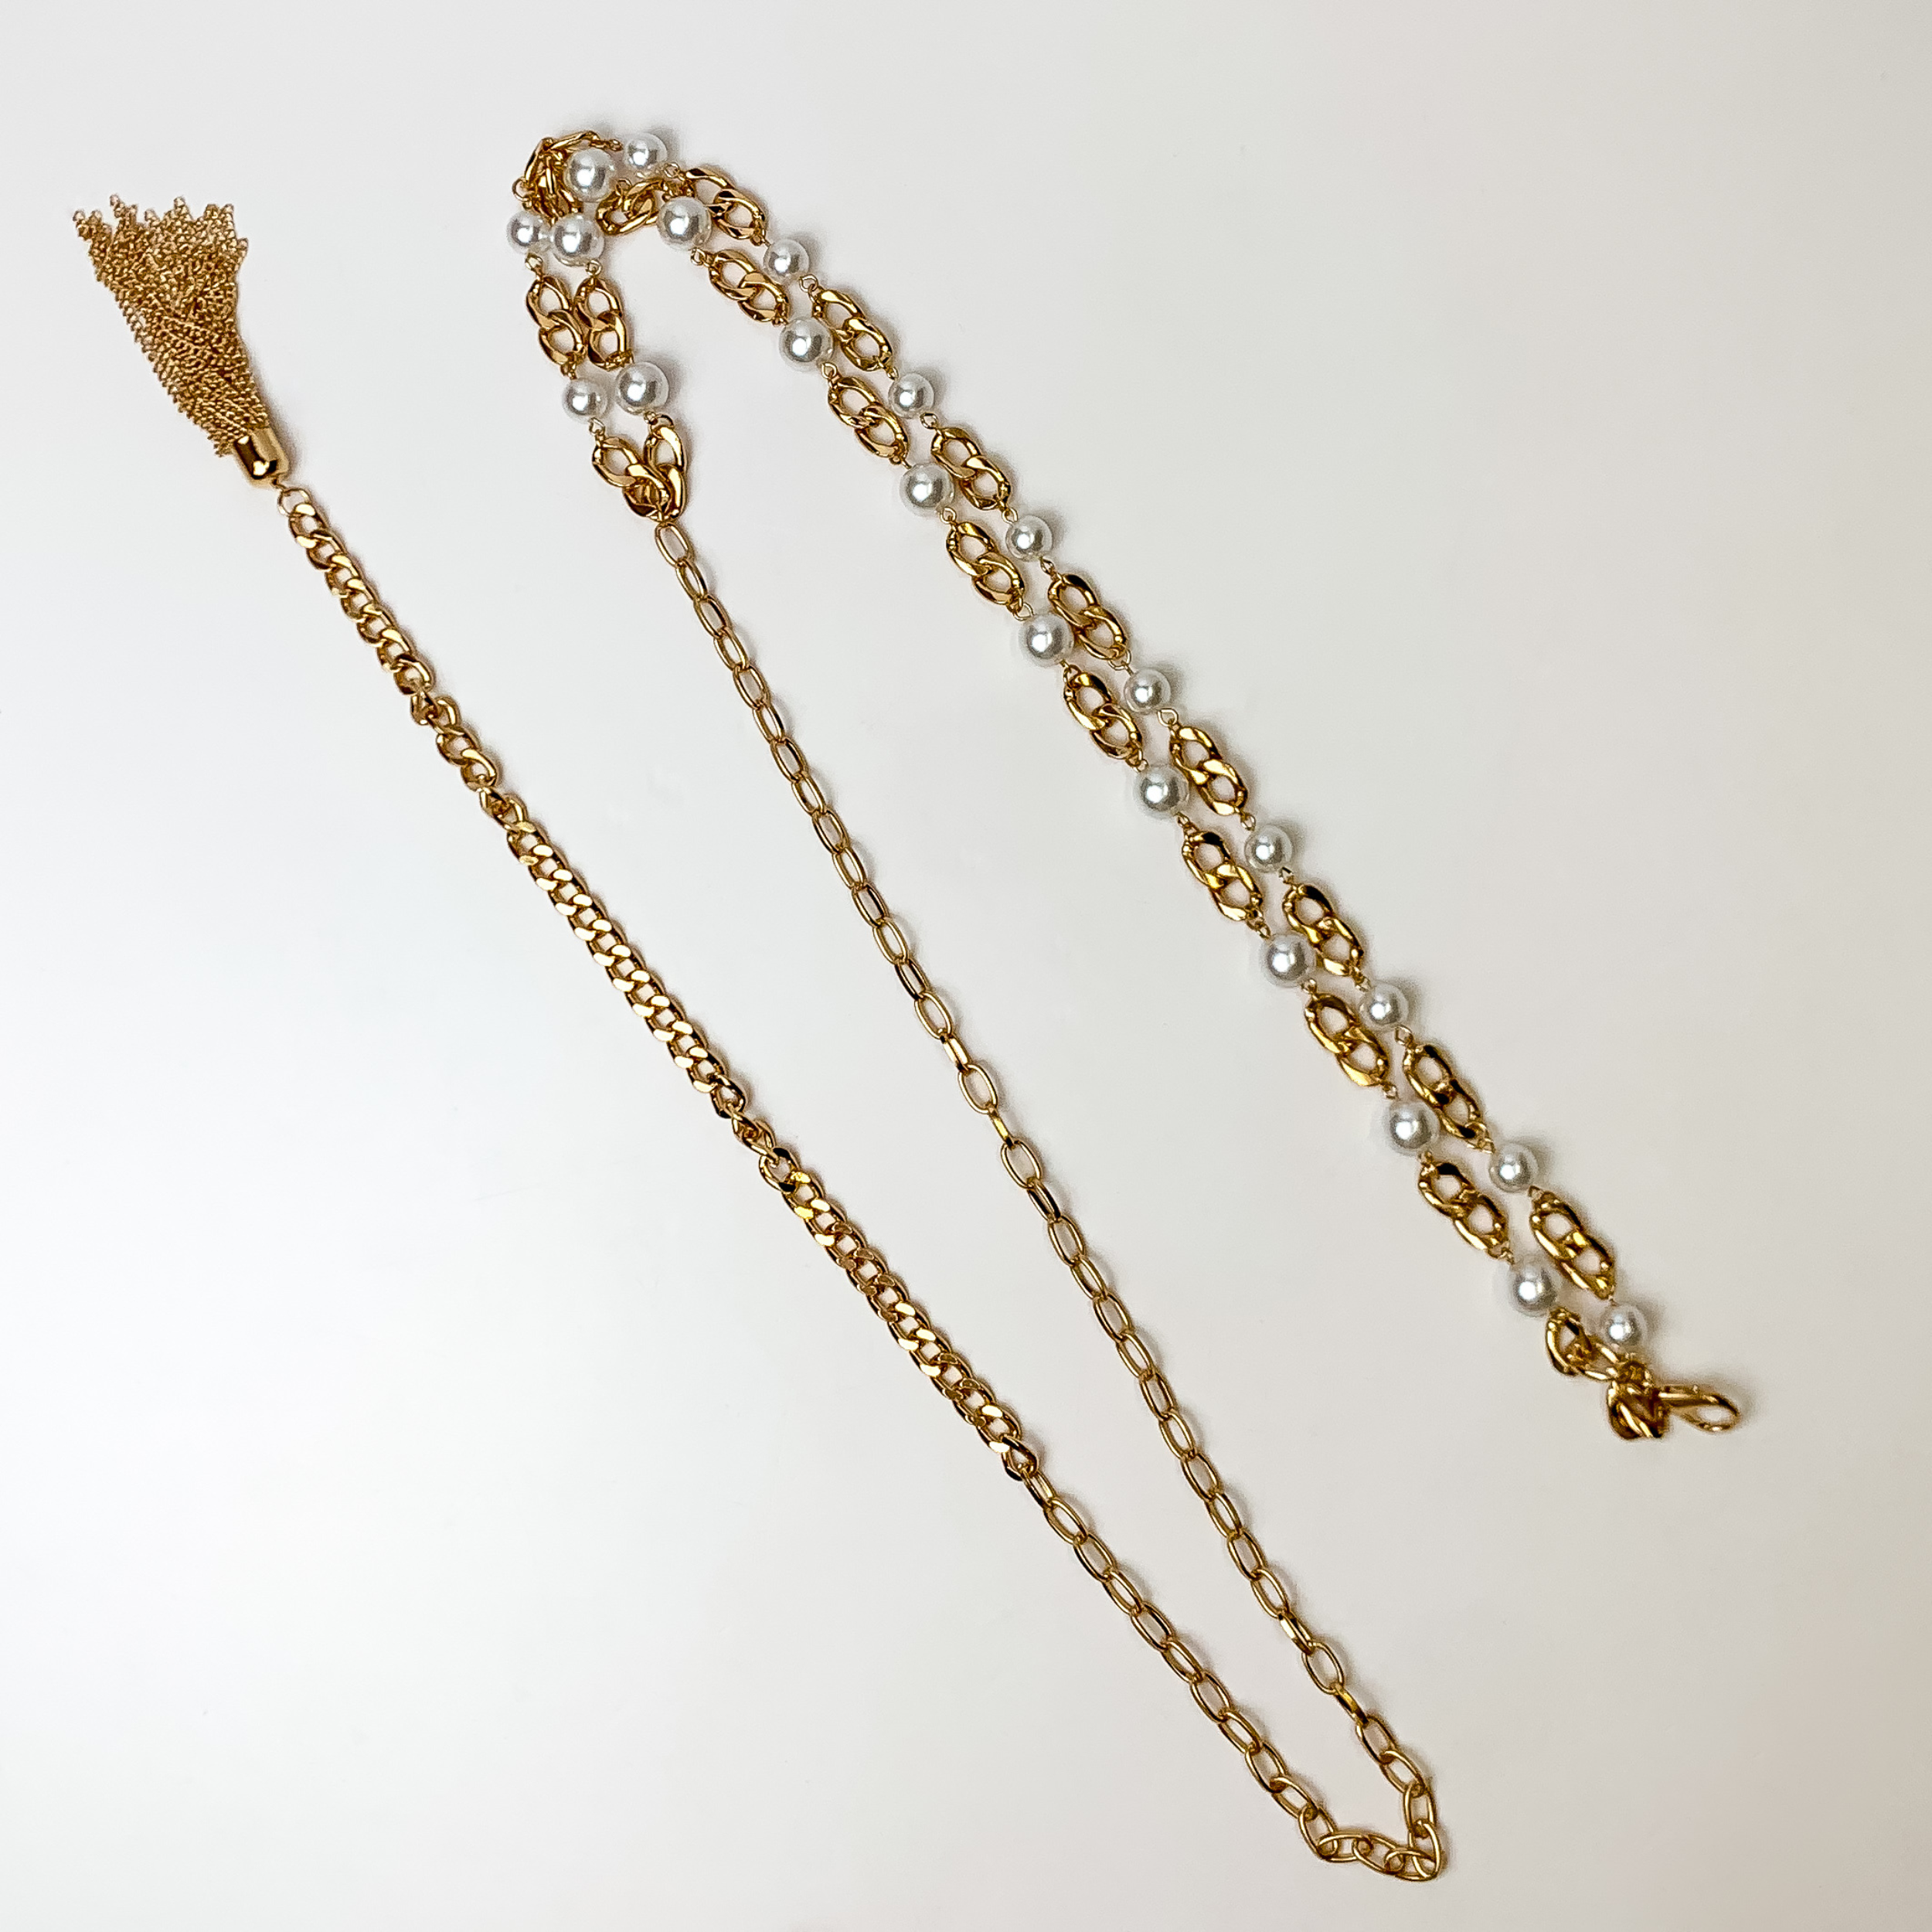 This Dazzling Pearl Gold Tone Belt with fringe is pictured on a white background.